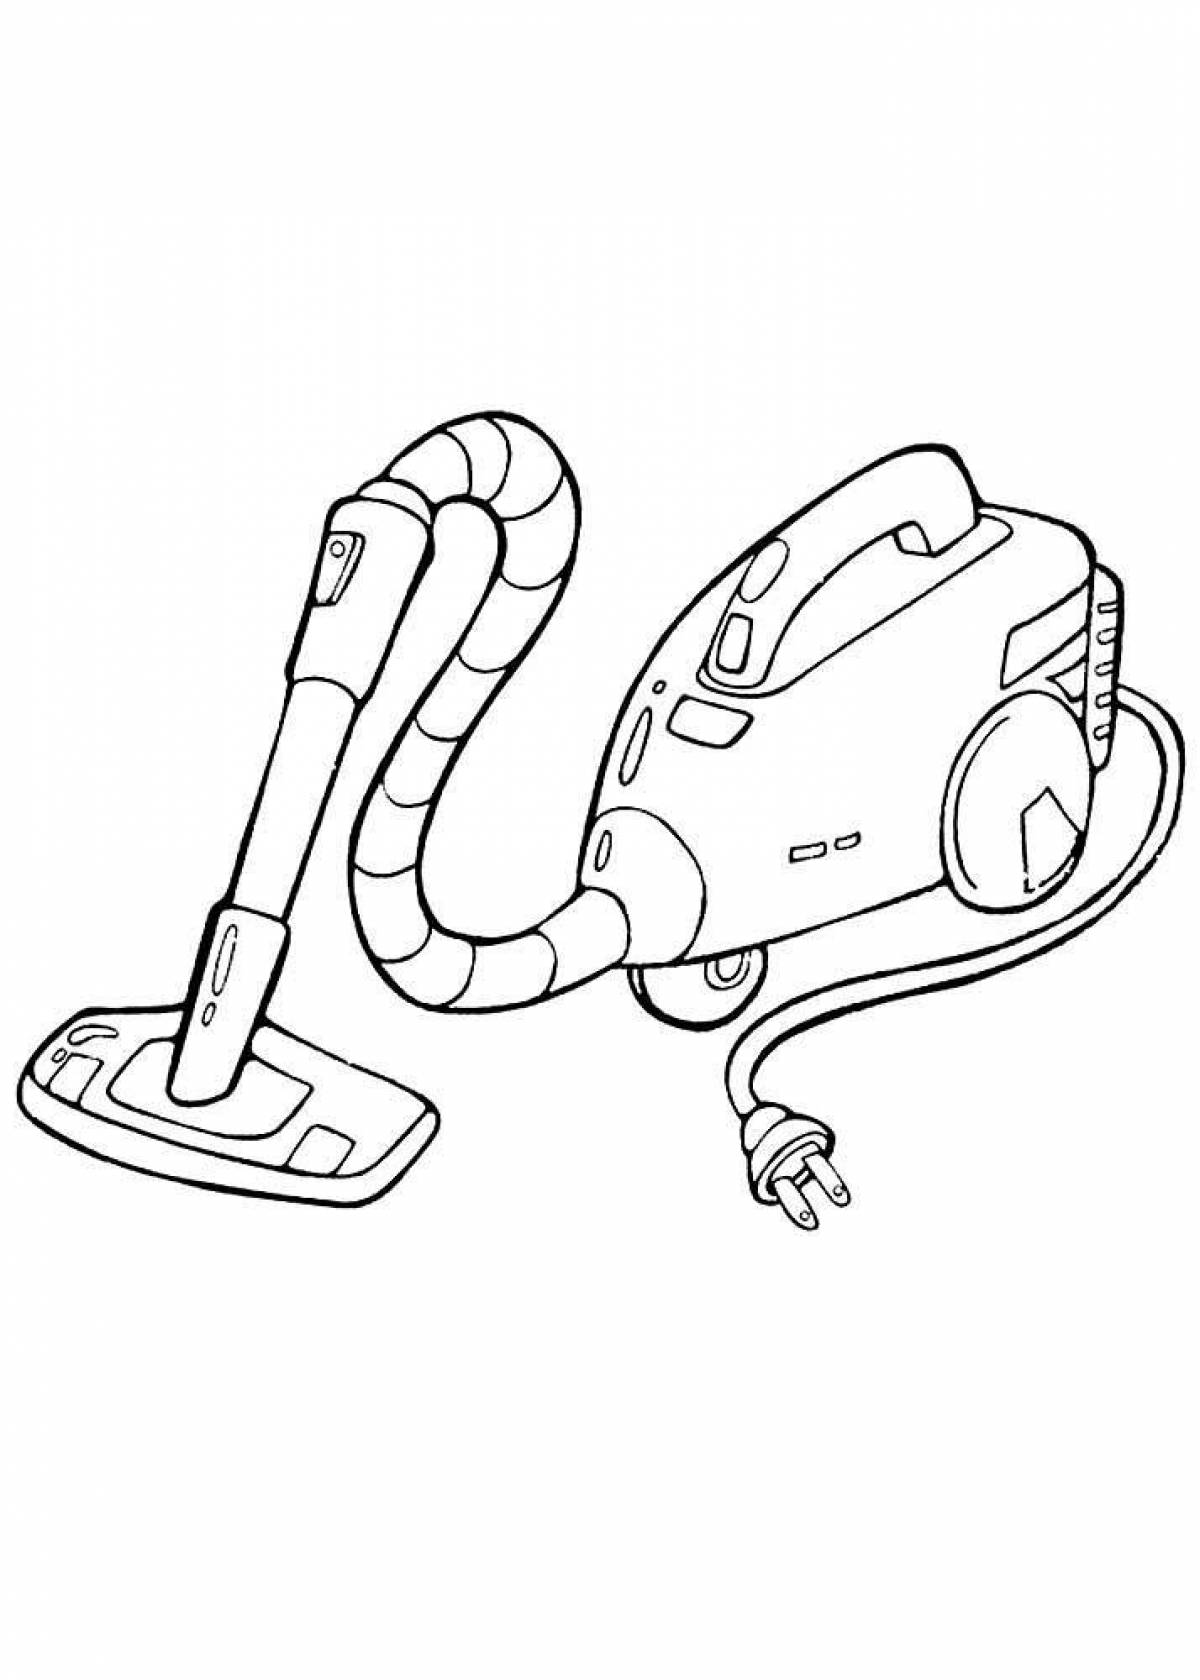 Cute electrical appliances coloring page